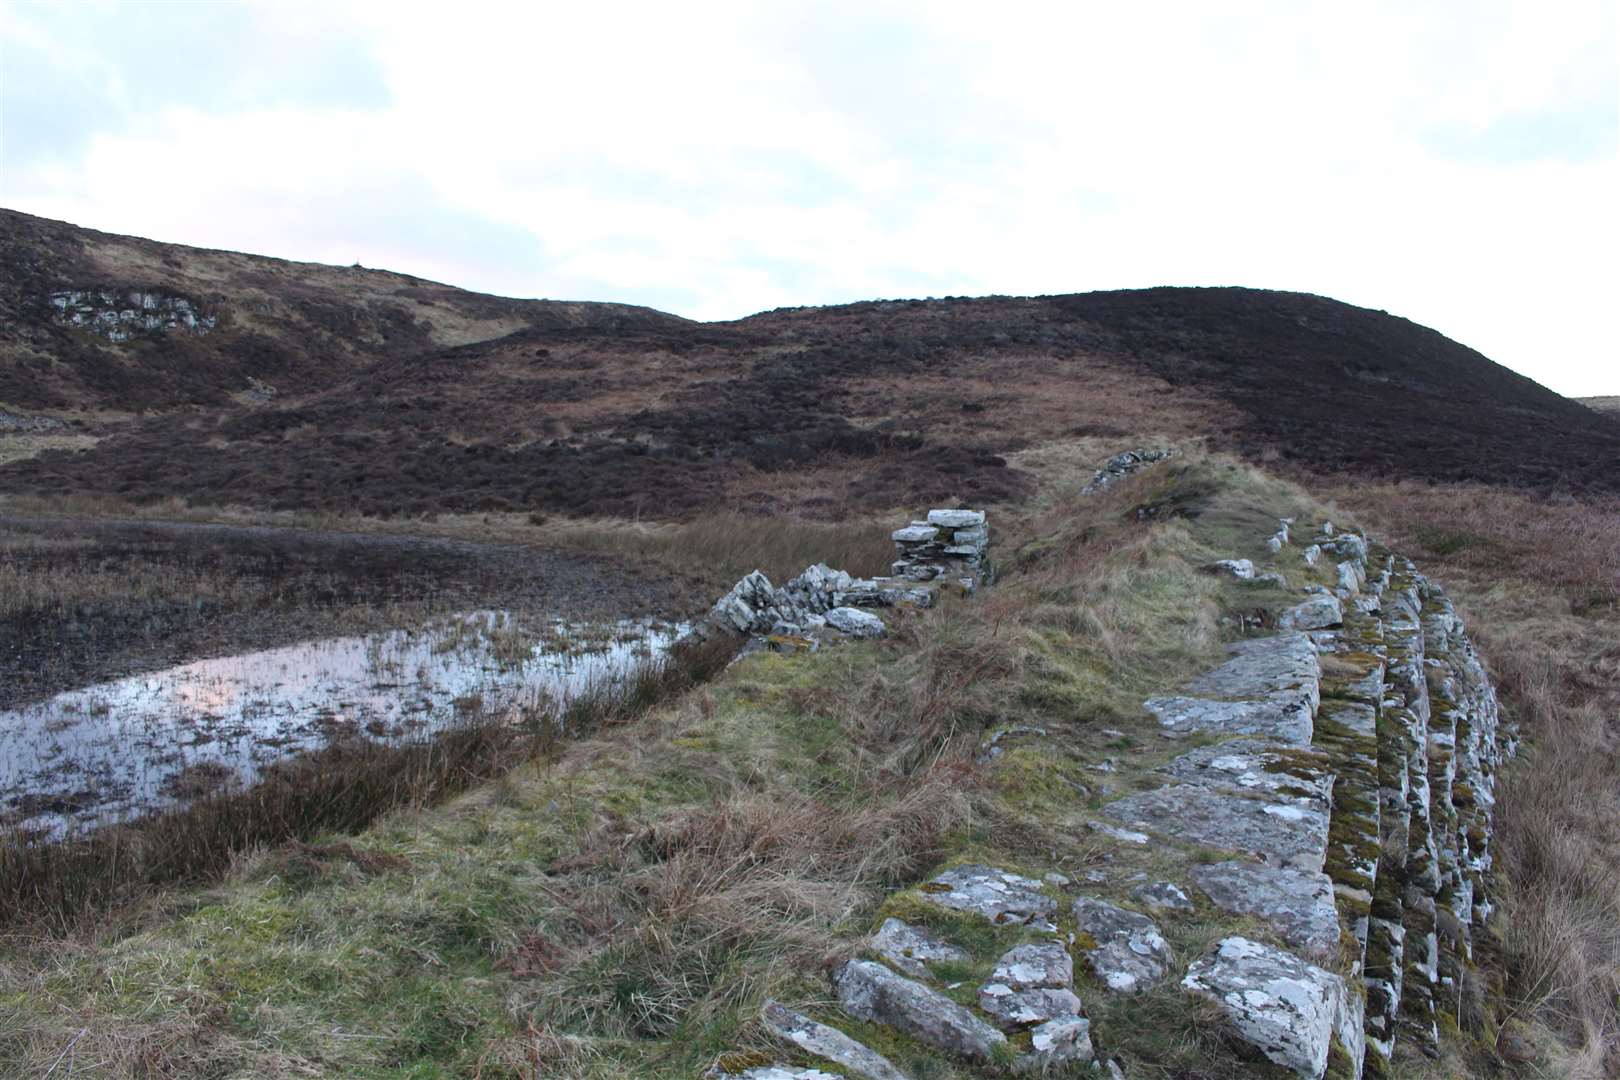 Stone from the chambered cairn was taken in the 1800s to create a nearby dam.